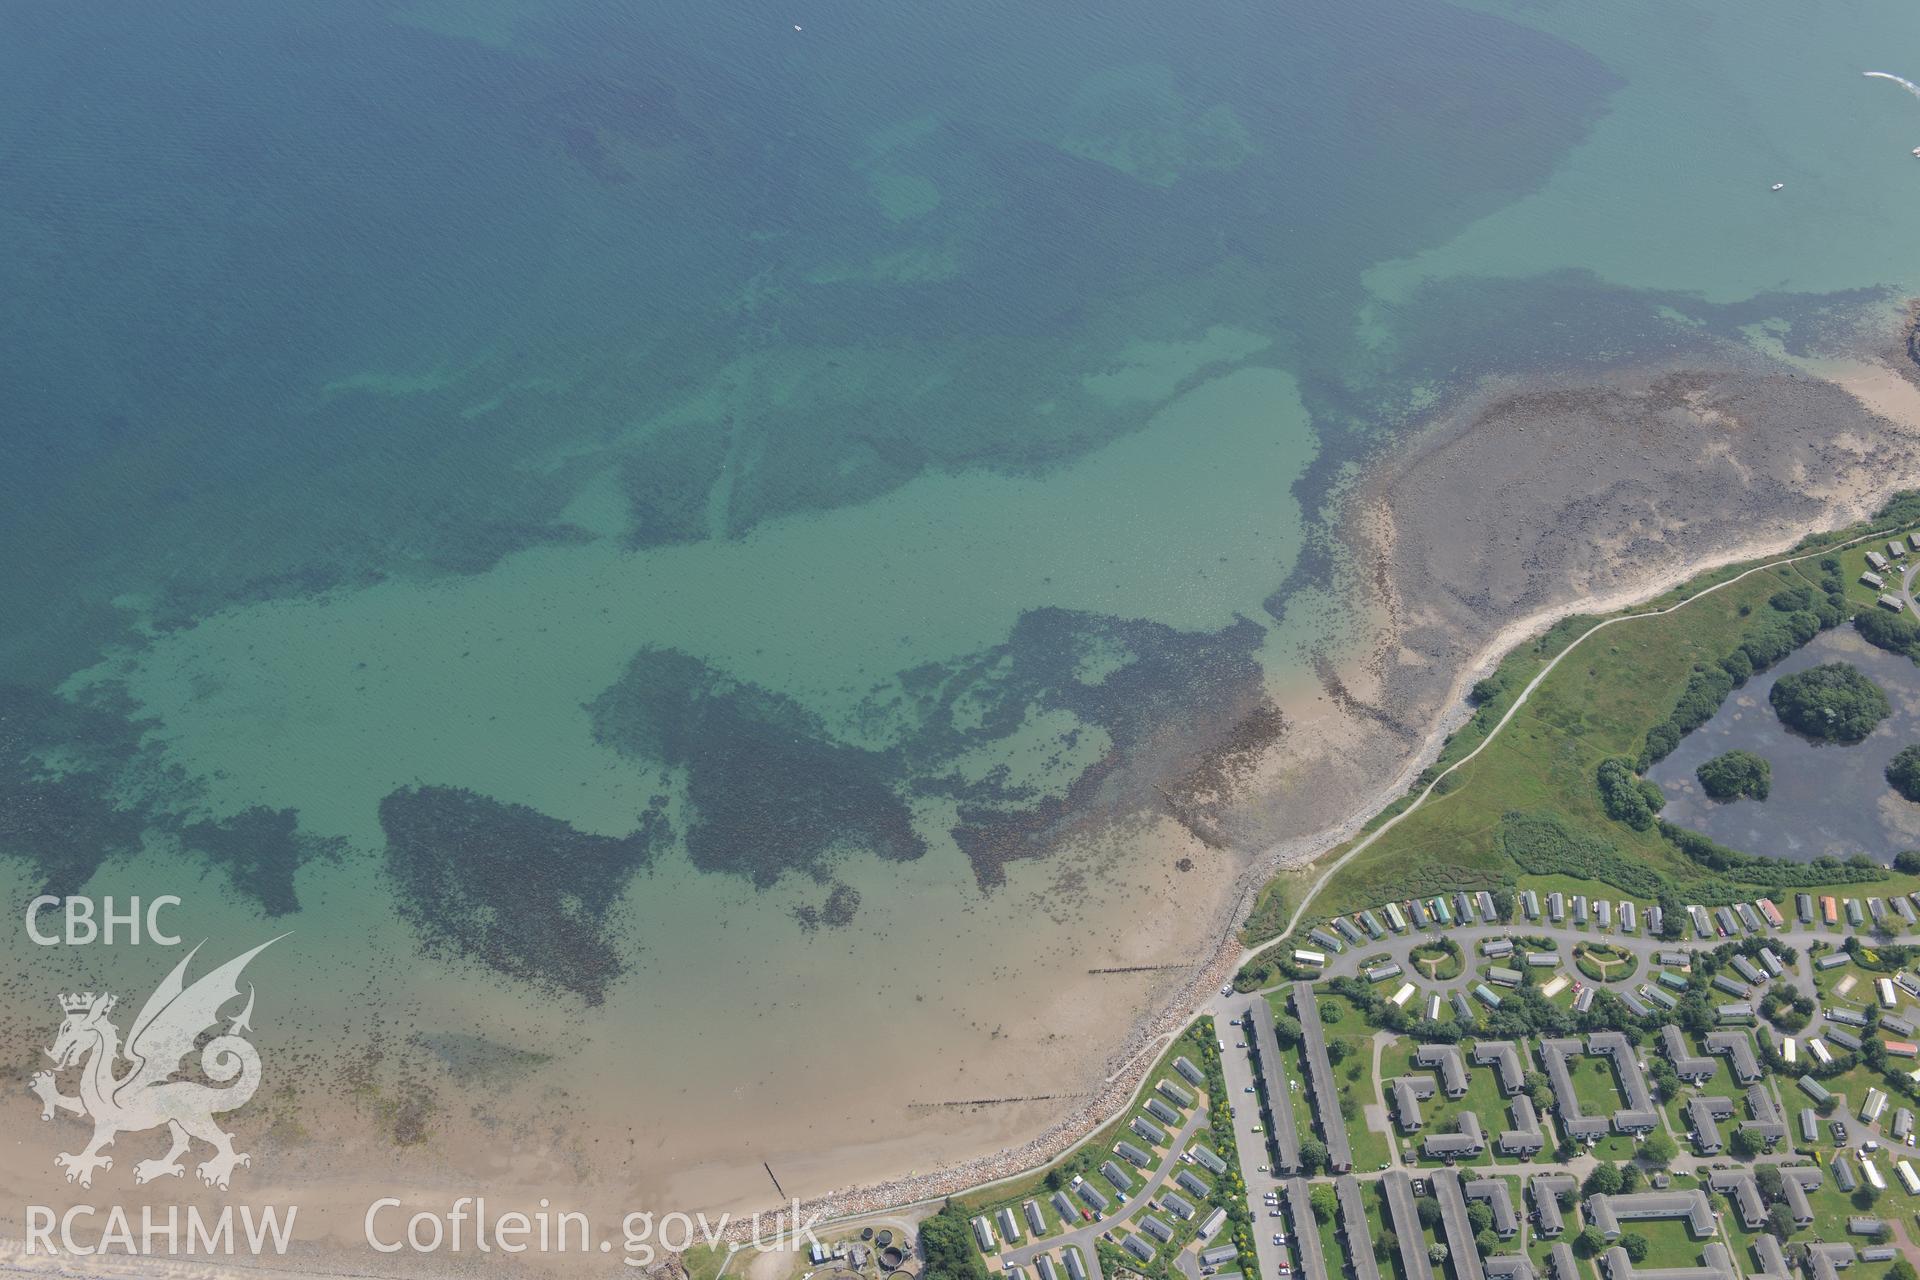 Hafan y Mor Holiday Park and Cerrig y Barcdy Fish Trap, Pwllheli. Oblique aerial photograph taken during the Royal Commission?s programme of archaeological aerial reconnaissance by Toby Driver on 12th July 2013.